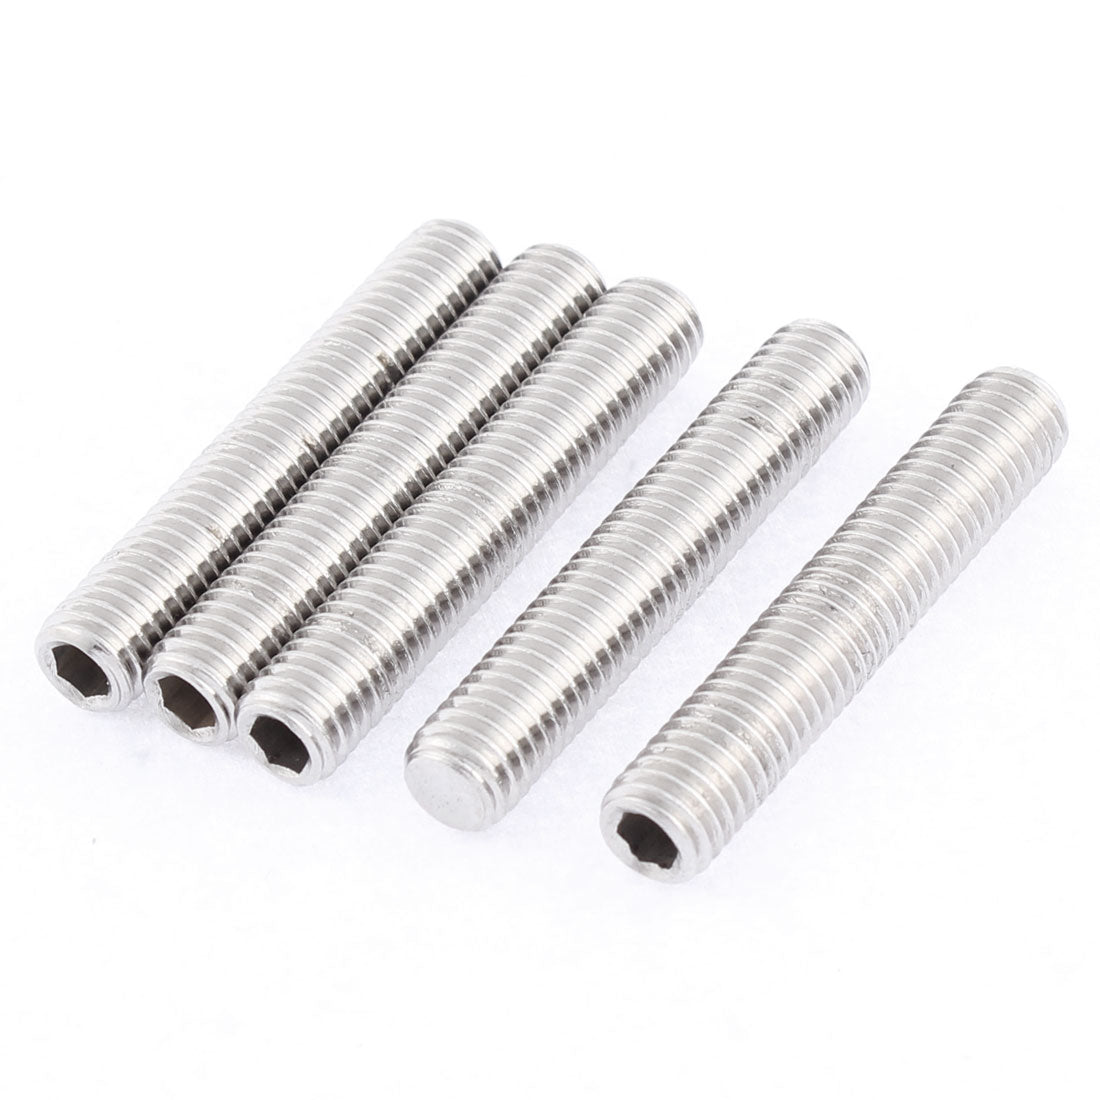 uxcell Uxcell M8x45mm 1.25mm Pitch Stainless Steel Hex Socket Set Flat Point Grub Screws 5pcs